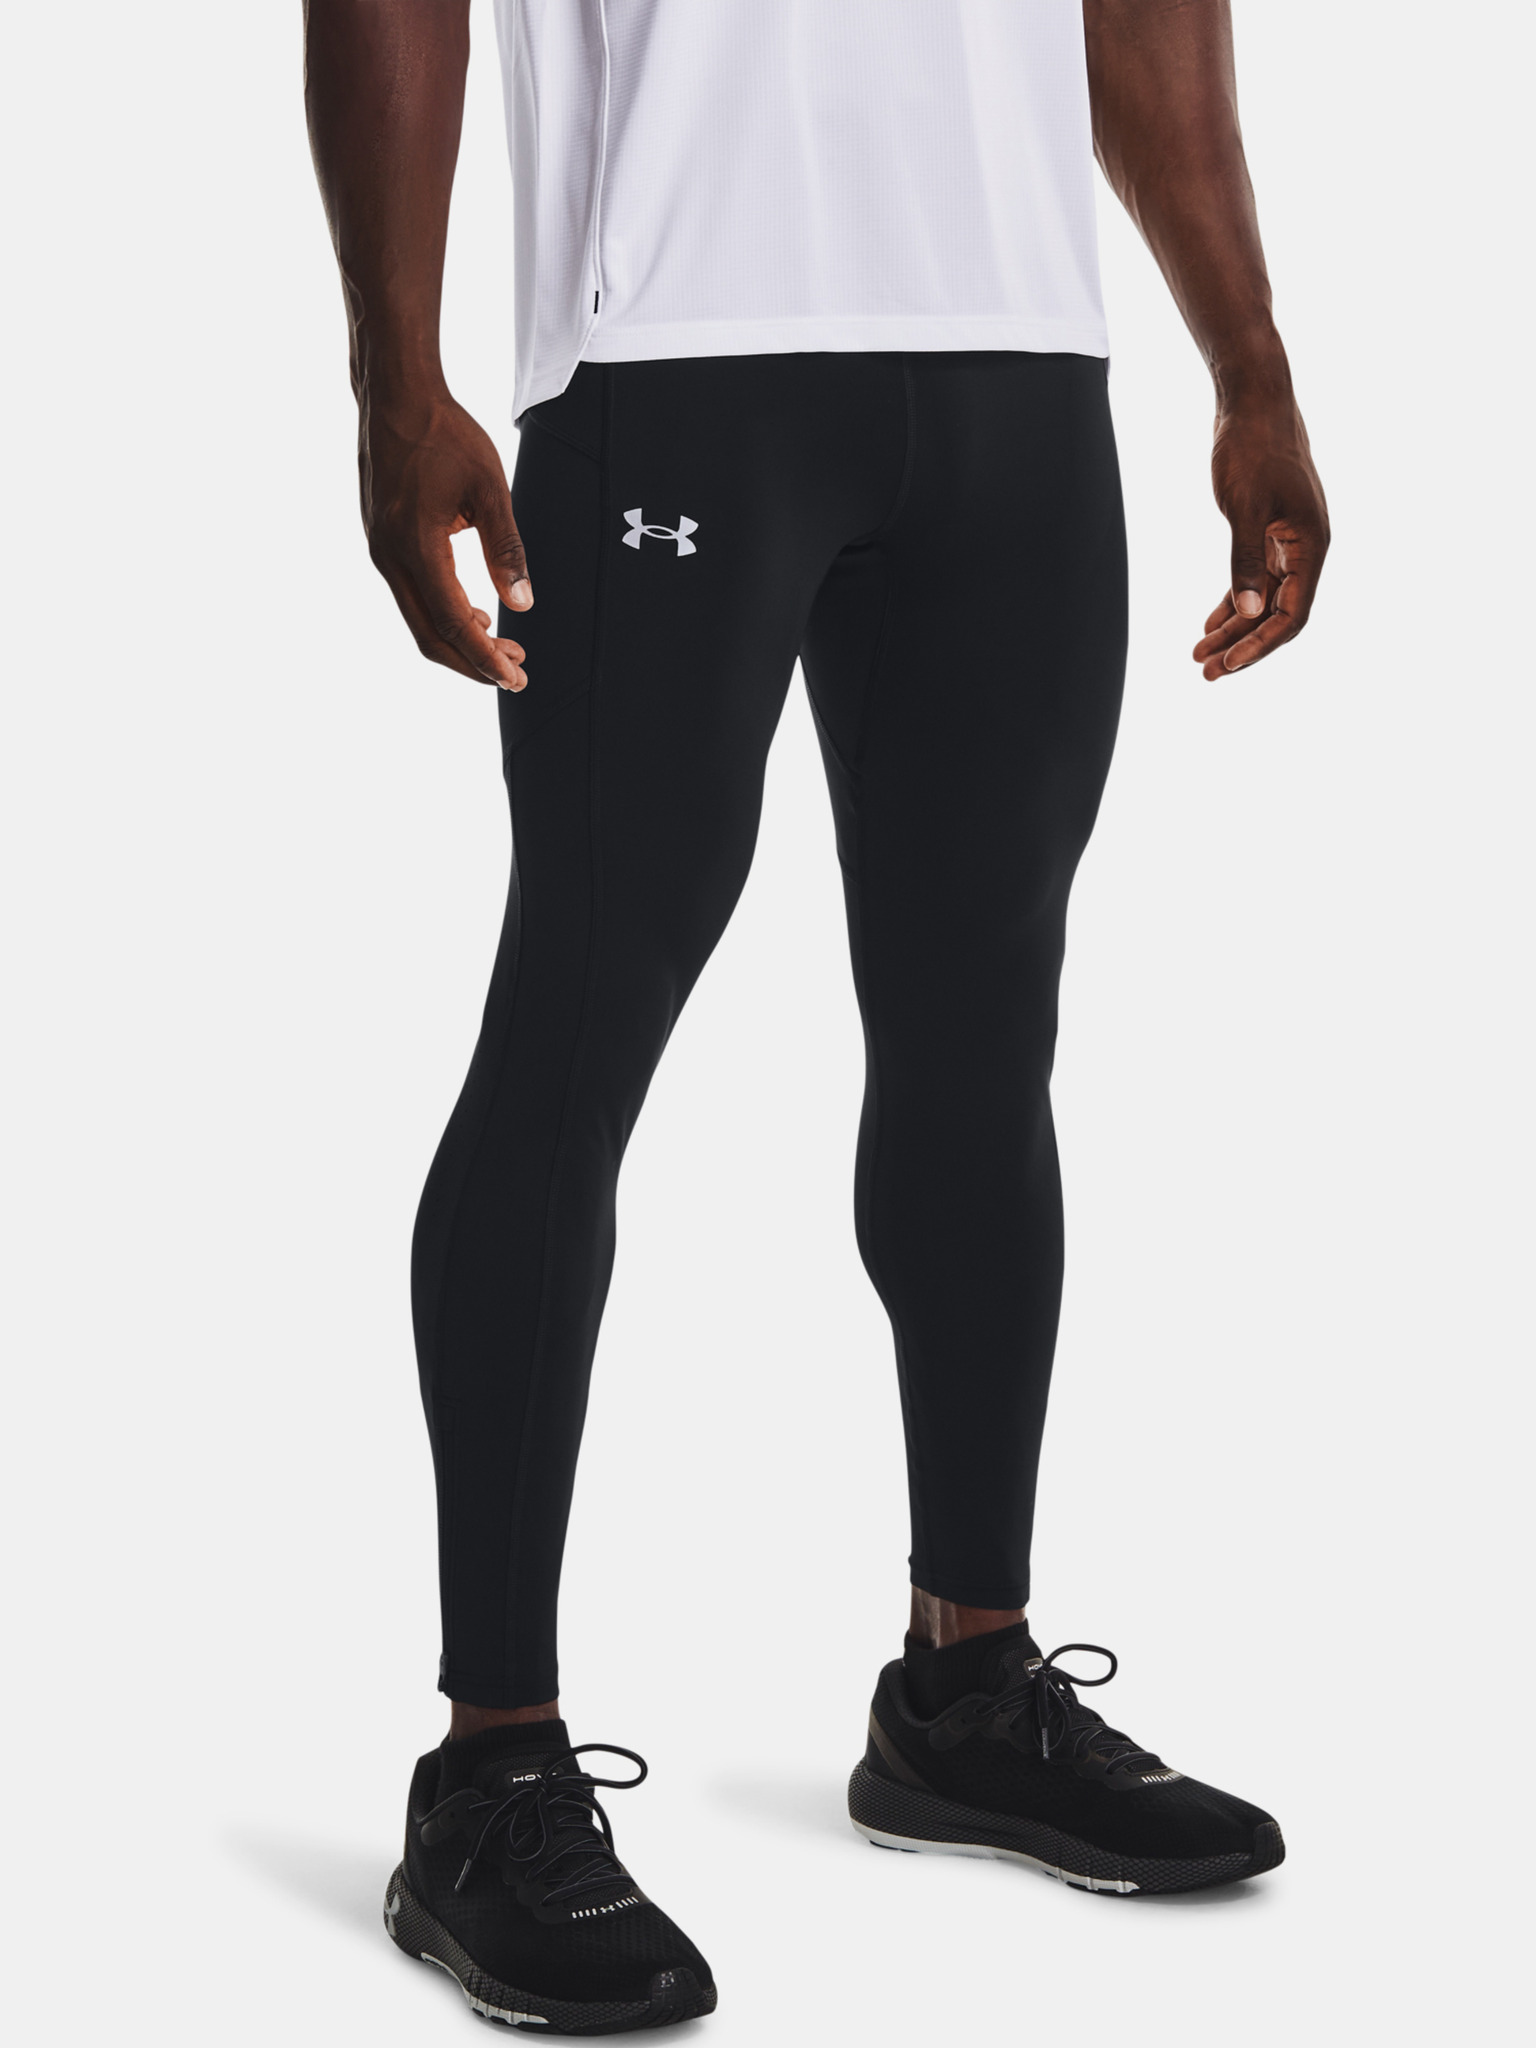 Under Armour Women's UA Fly Fast 3.0 Ankle Tights - Women's